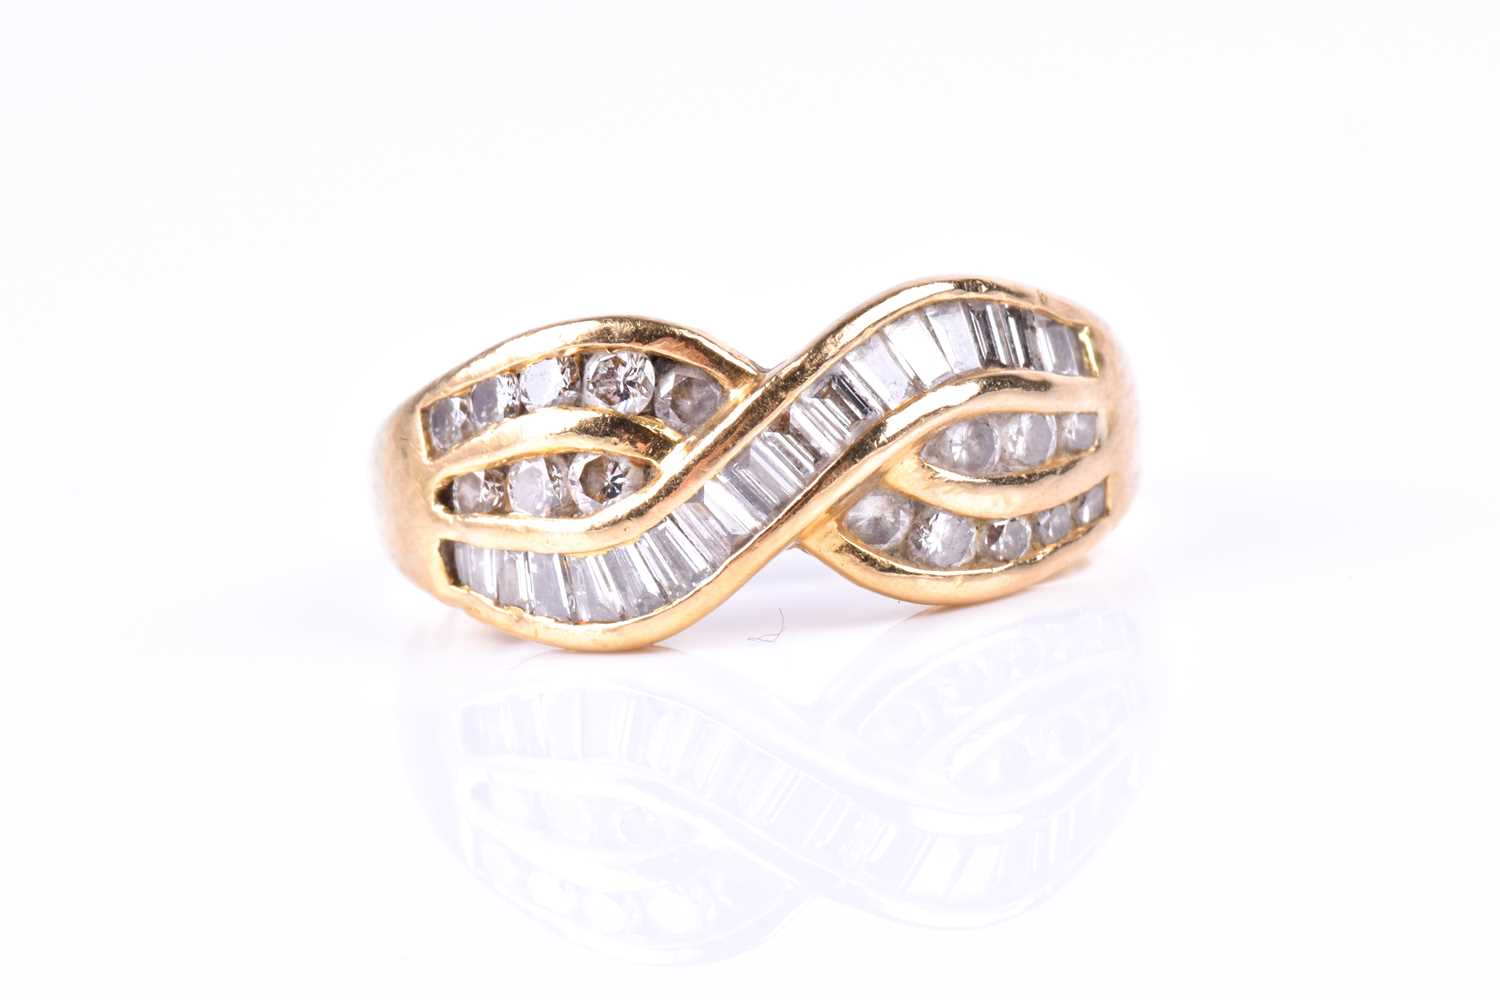 A yellow metal and diamond crossover ring, channel-set with mixed baguette-cut and round-cut